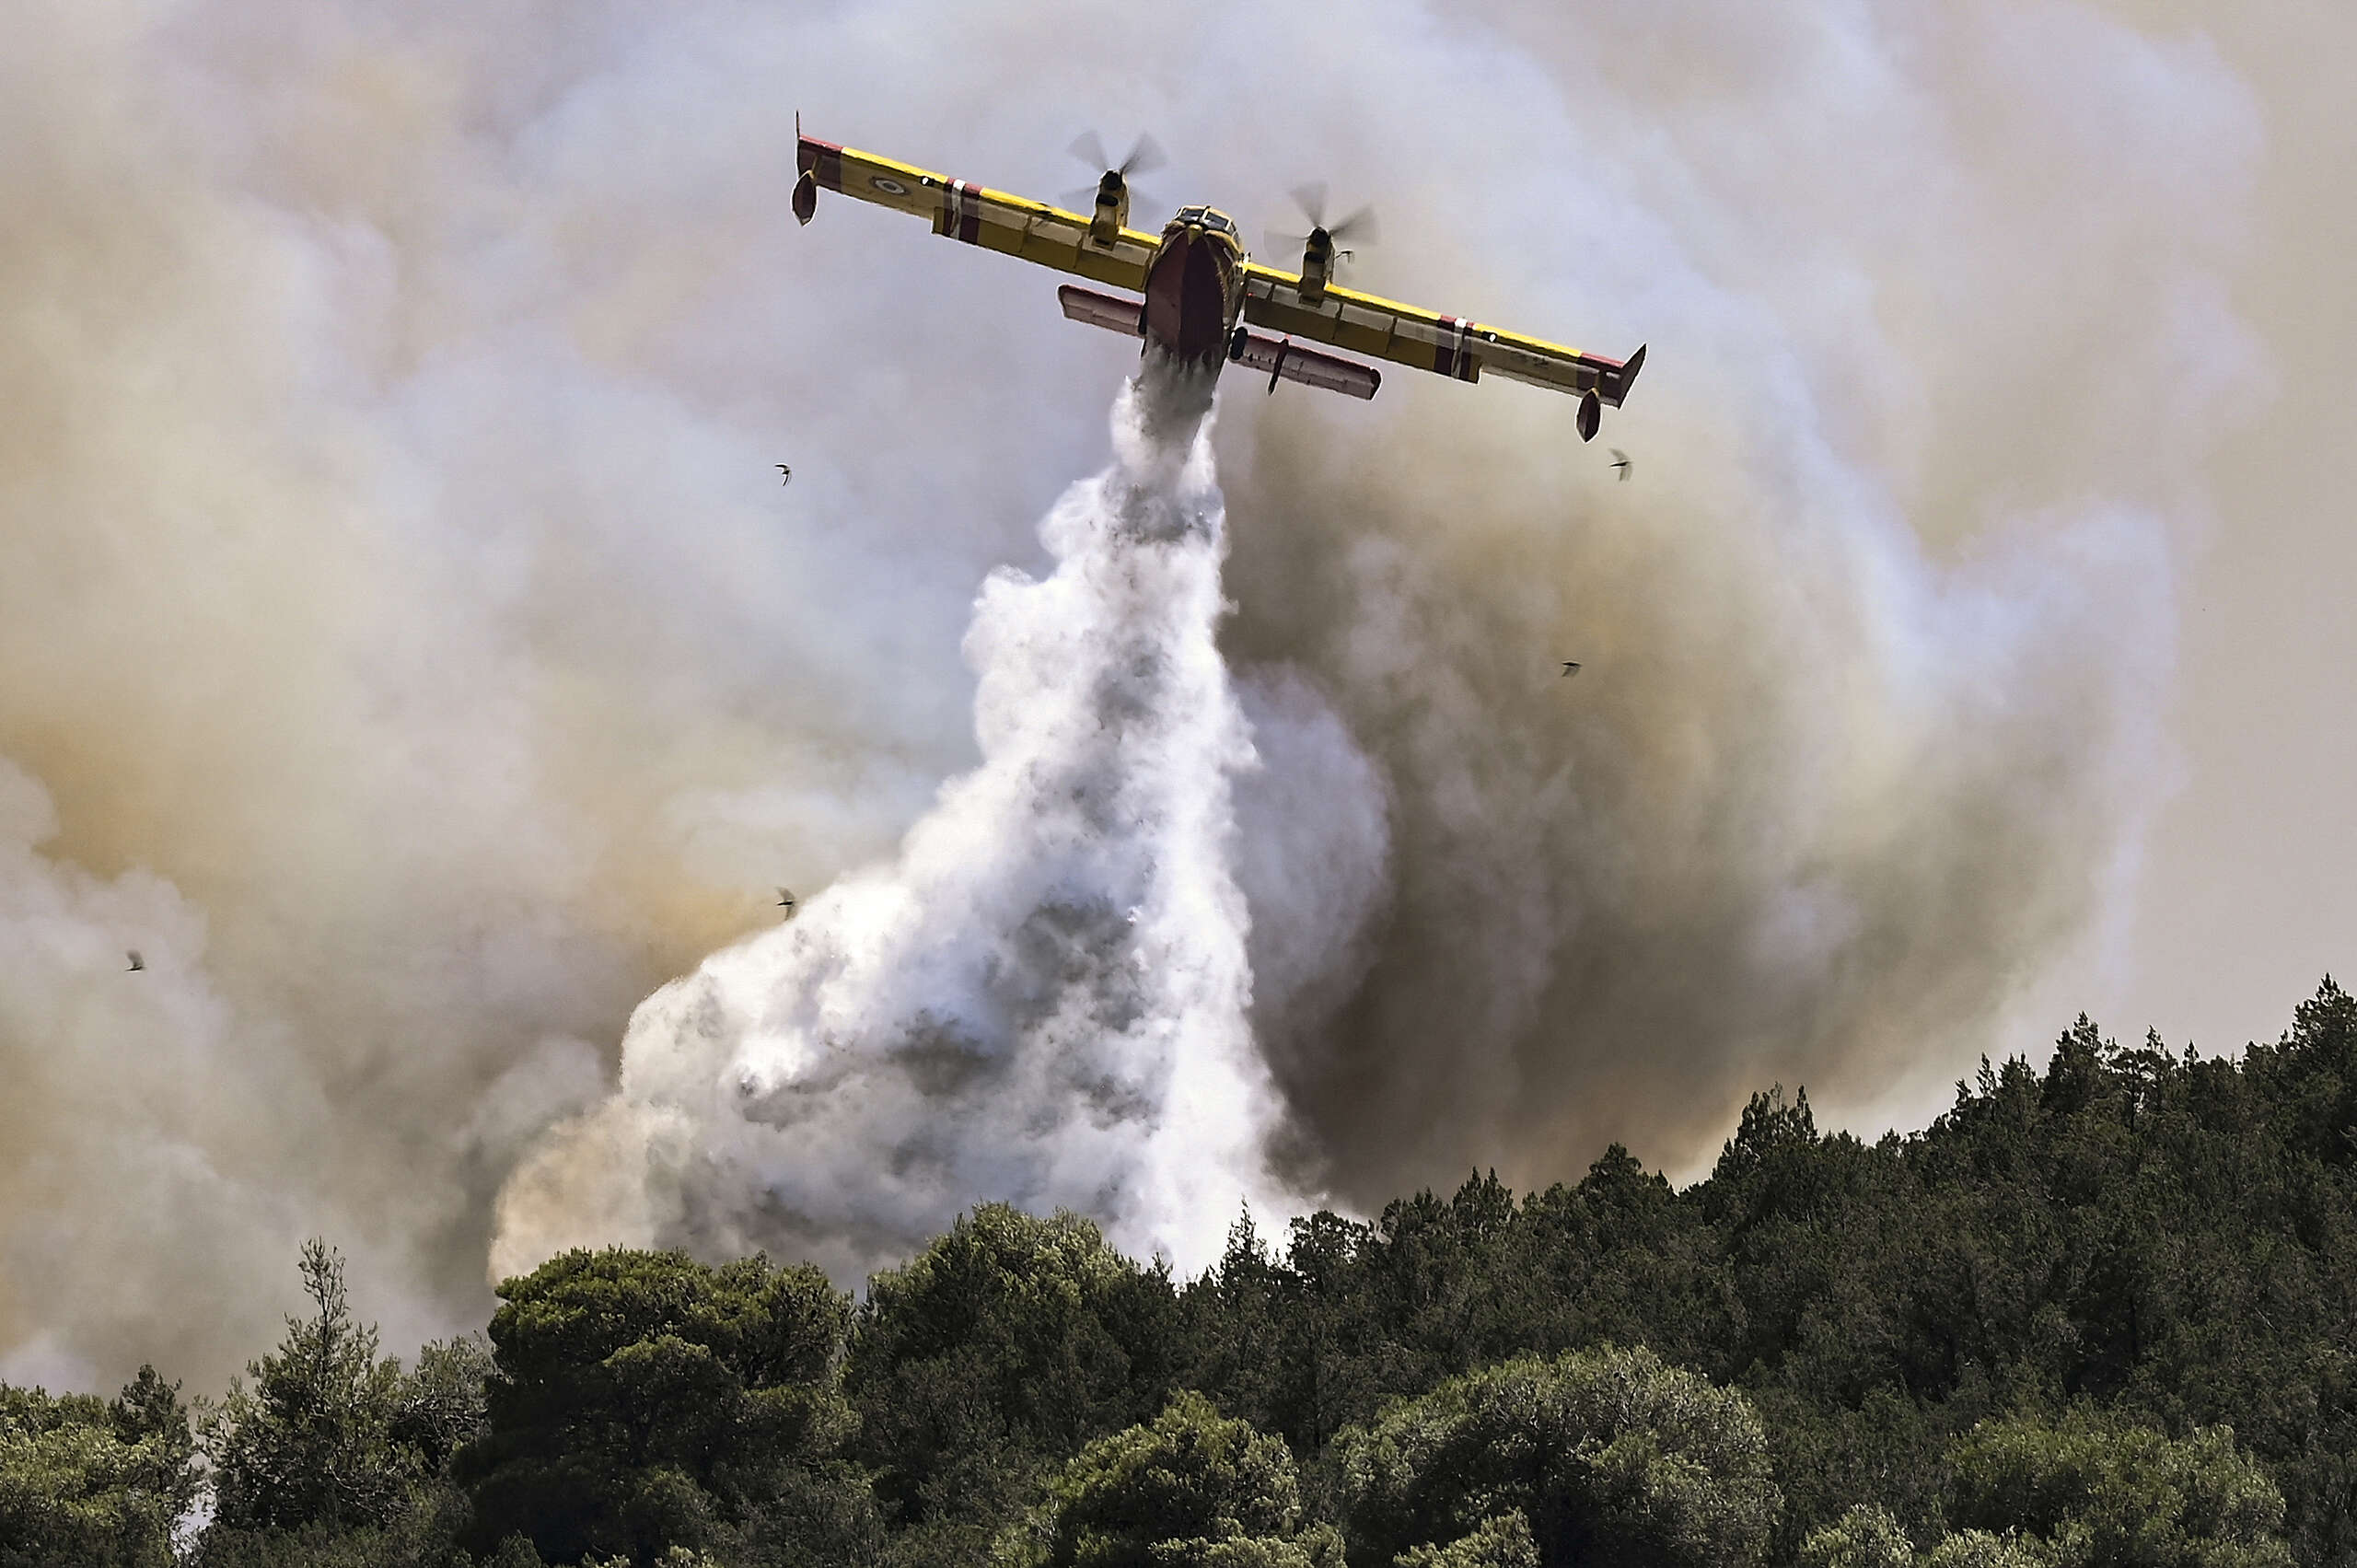 A firefighting plane sprays water during a fire in Dervenochoria, north-west of Athens © Spyros BAKALIS / AFP